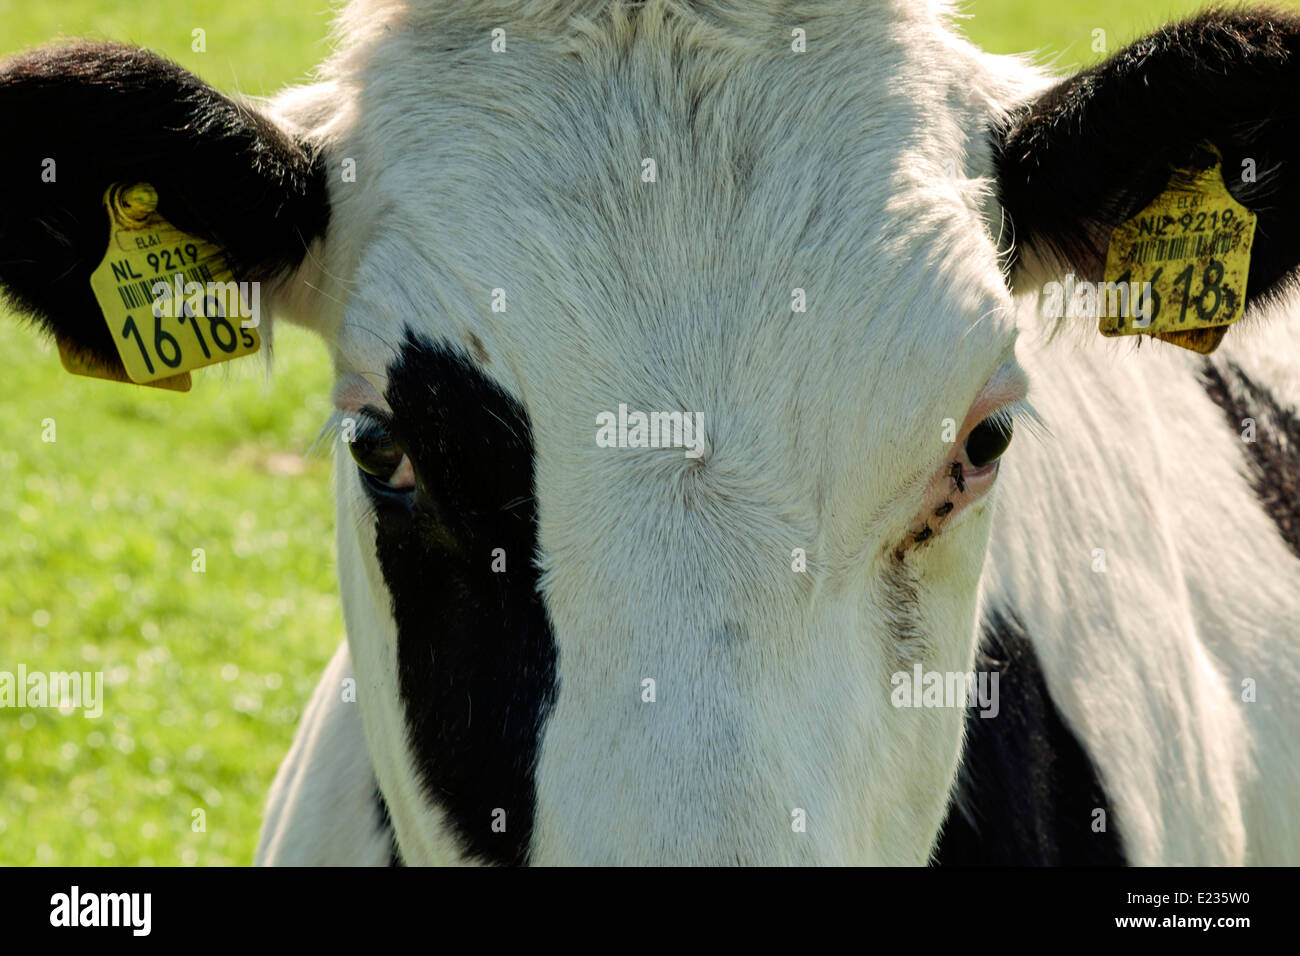 The Netherlands: Portrait of a black and white dairy cow with identification tags in both ears. Stock Photo